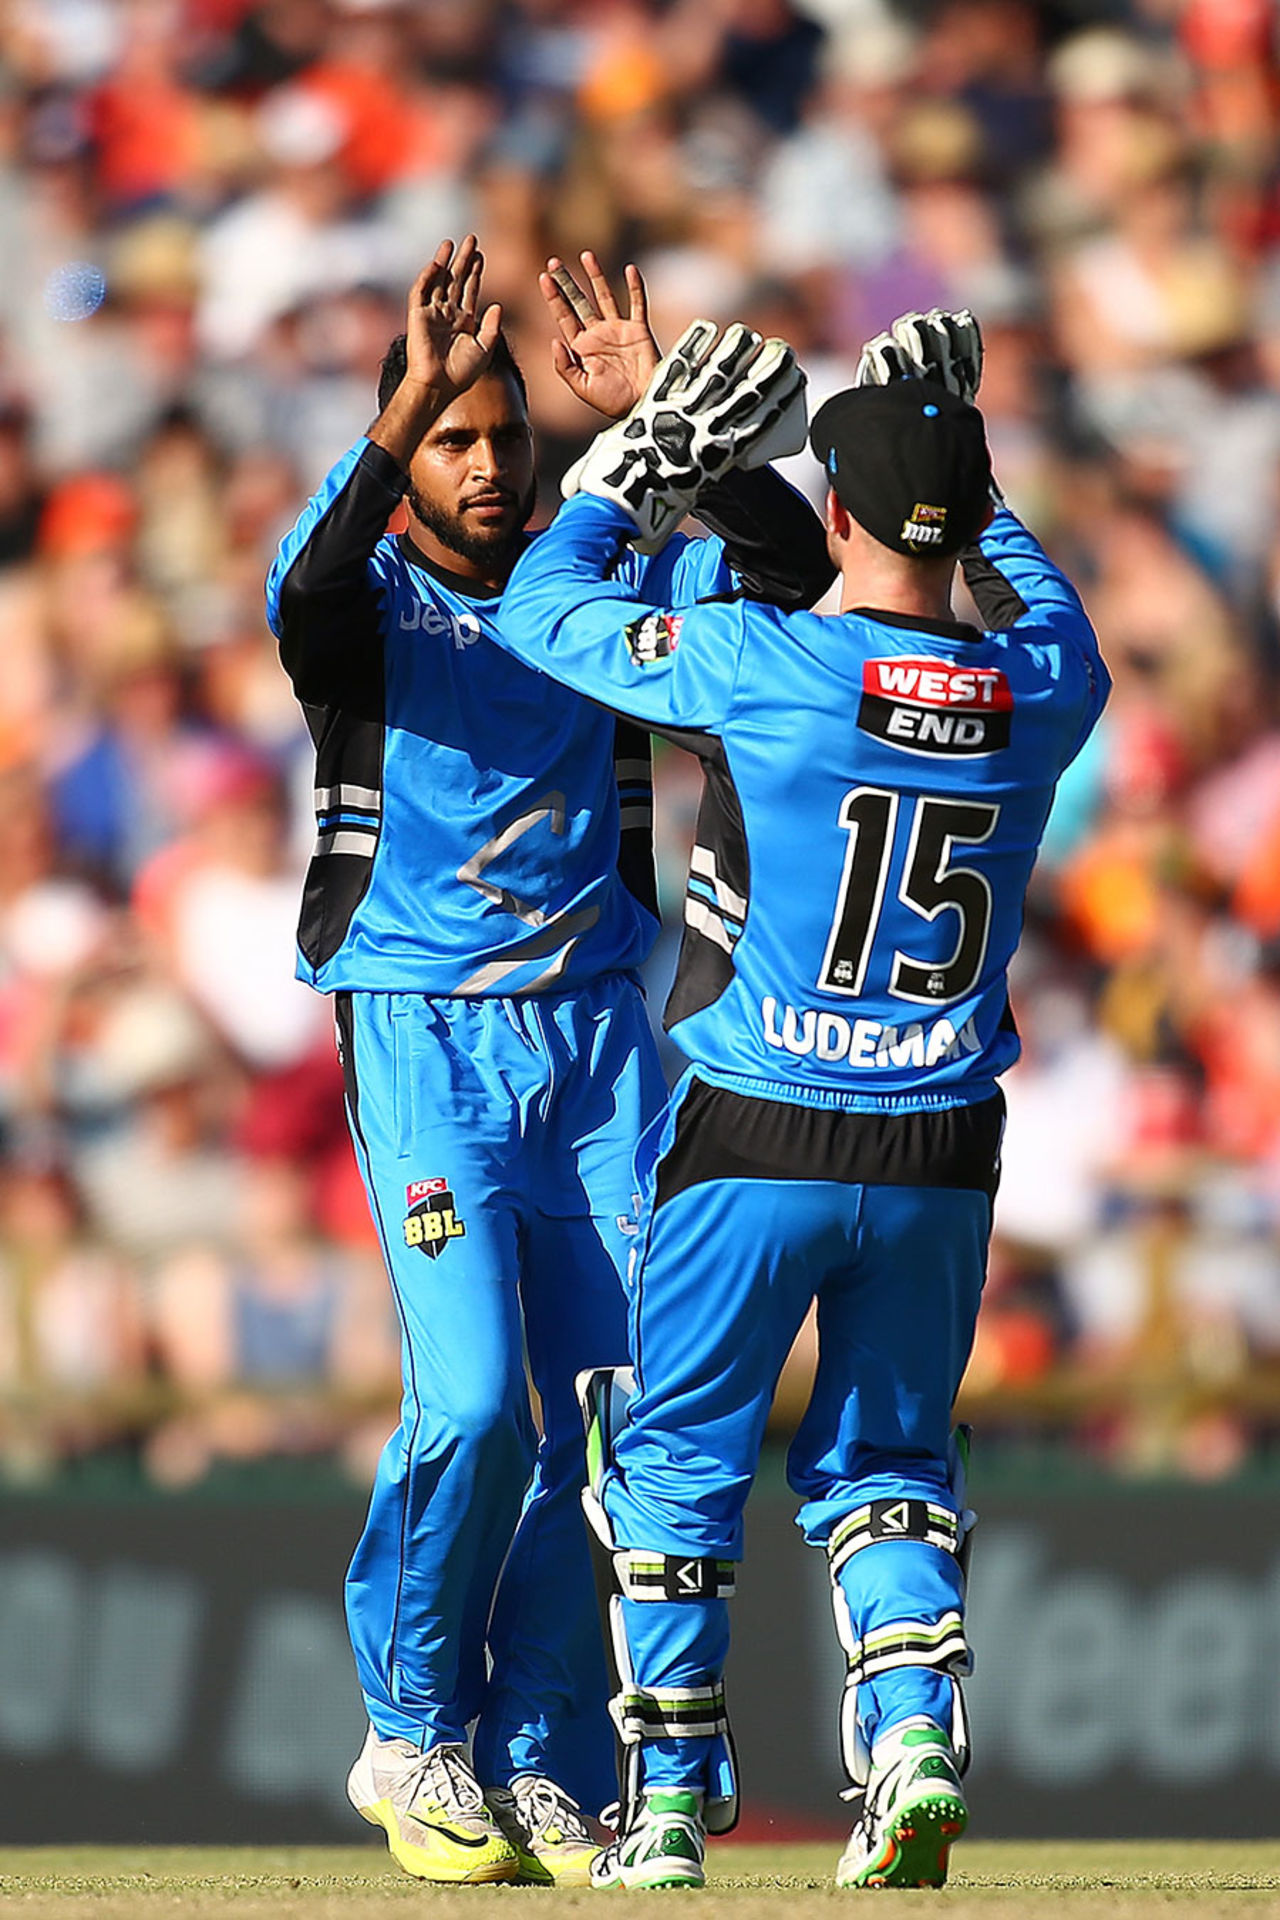 Adil Rashid claims another of his 15 group-stage wickets, Perth Scorchers v Adelaide Strikers, BBL 2015-16, Perth, December 21, 2016